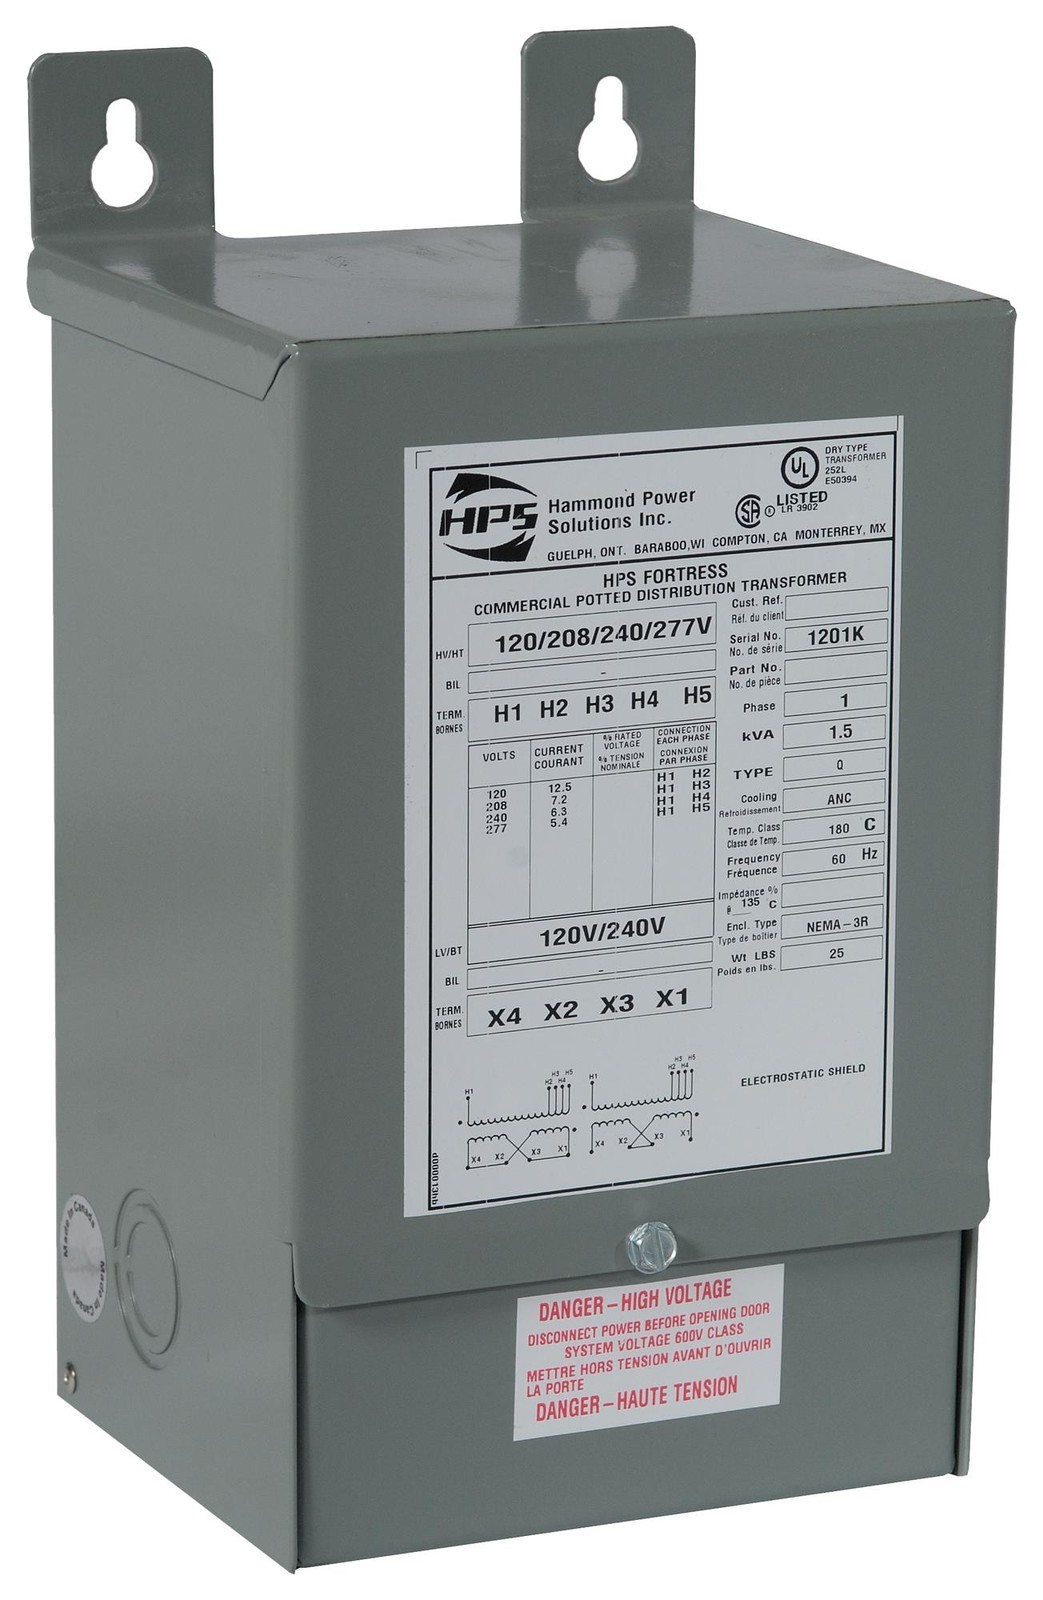 Hammond Power Solutions C1F003Pes Wall Mount Transformer Type: EnCapacitorsulated Isolation